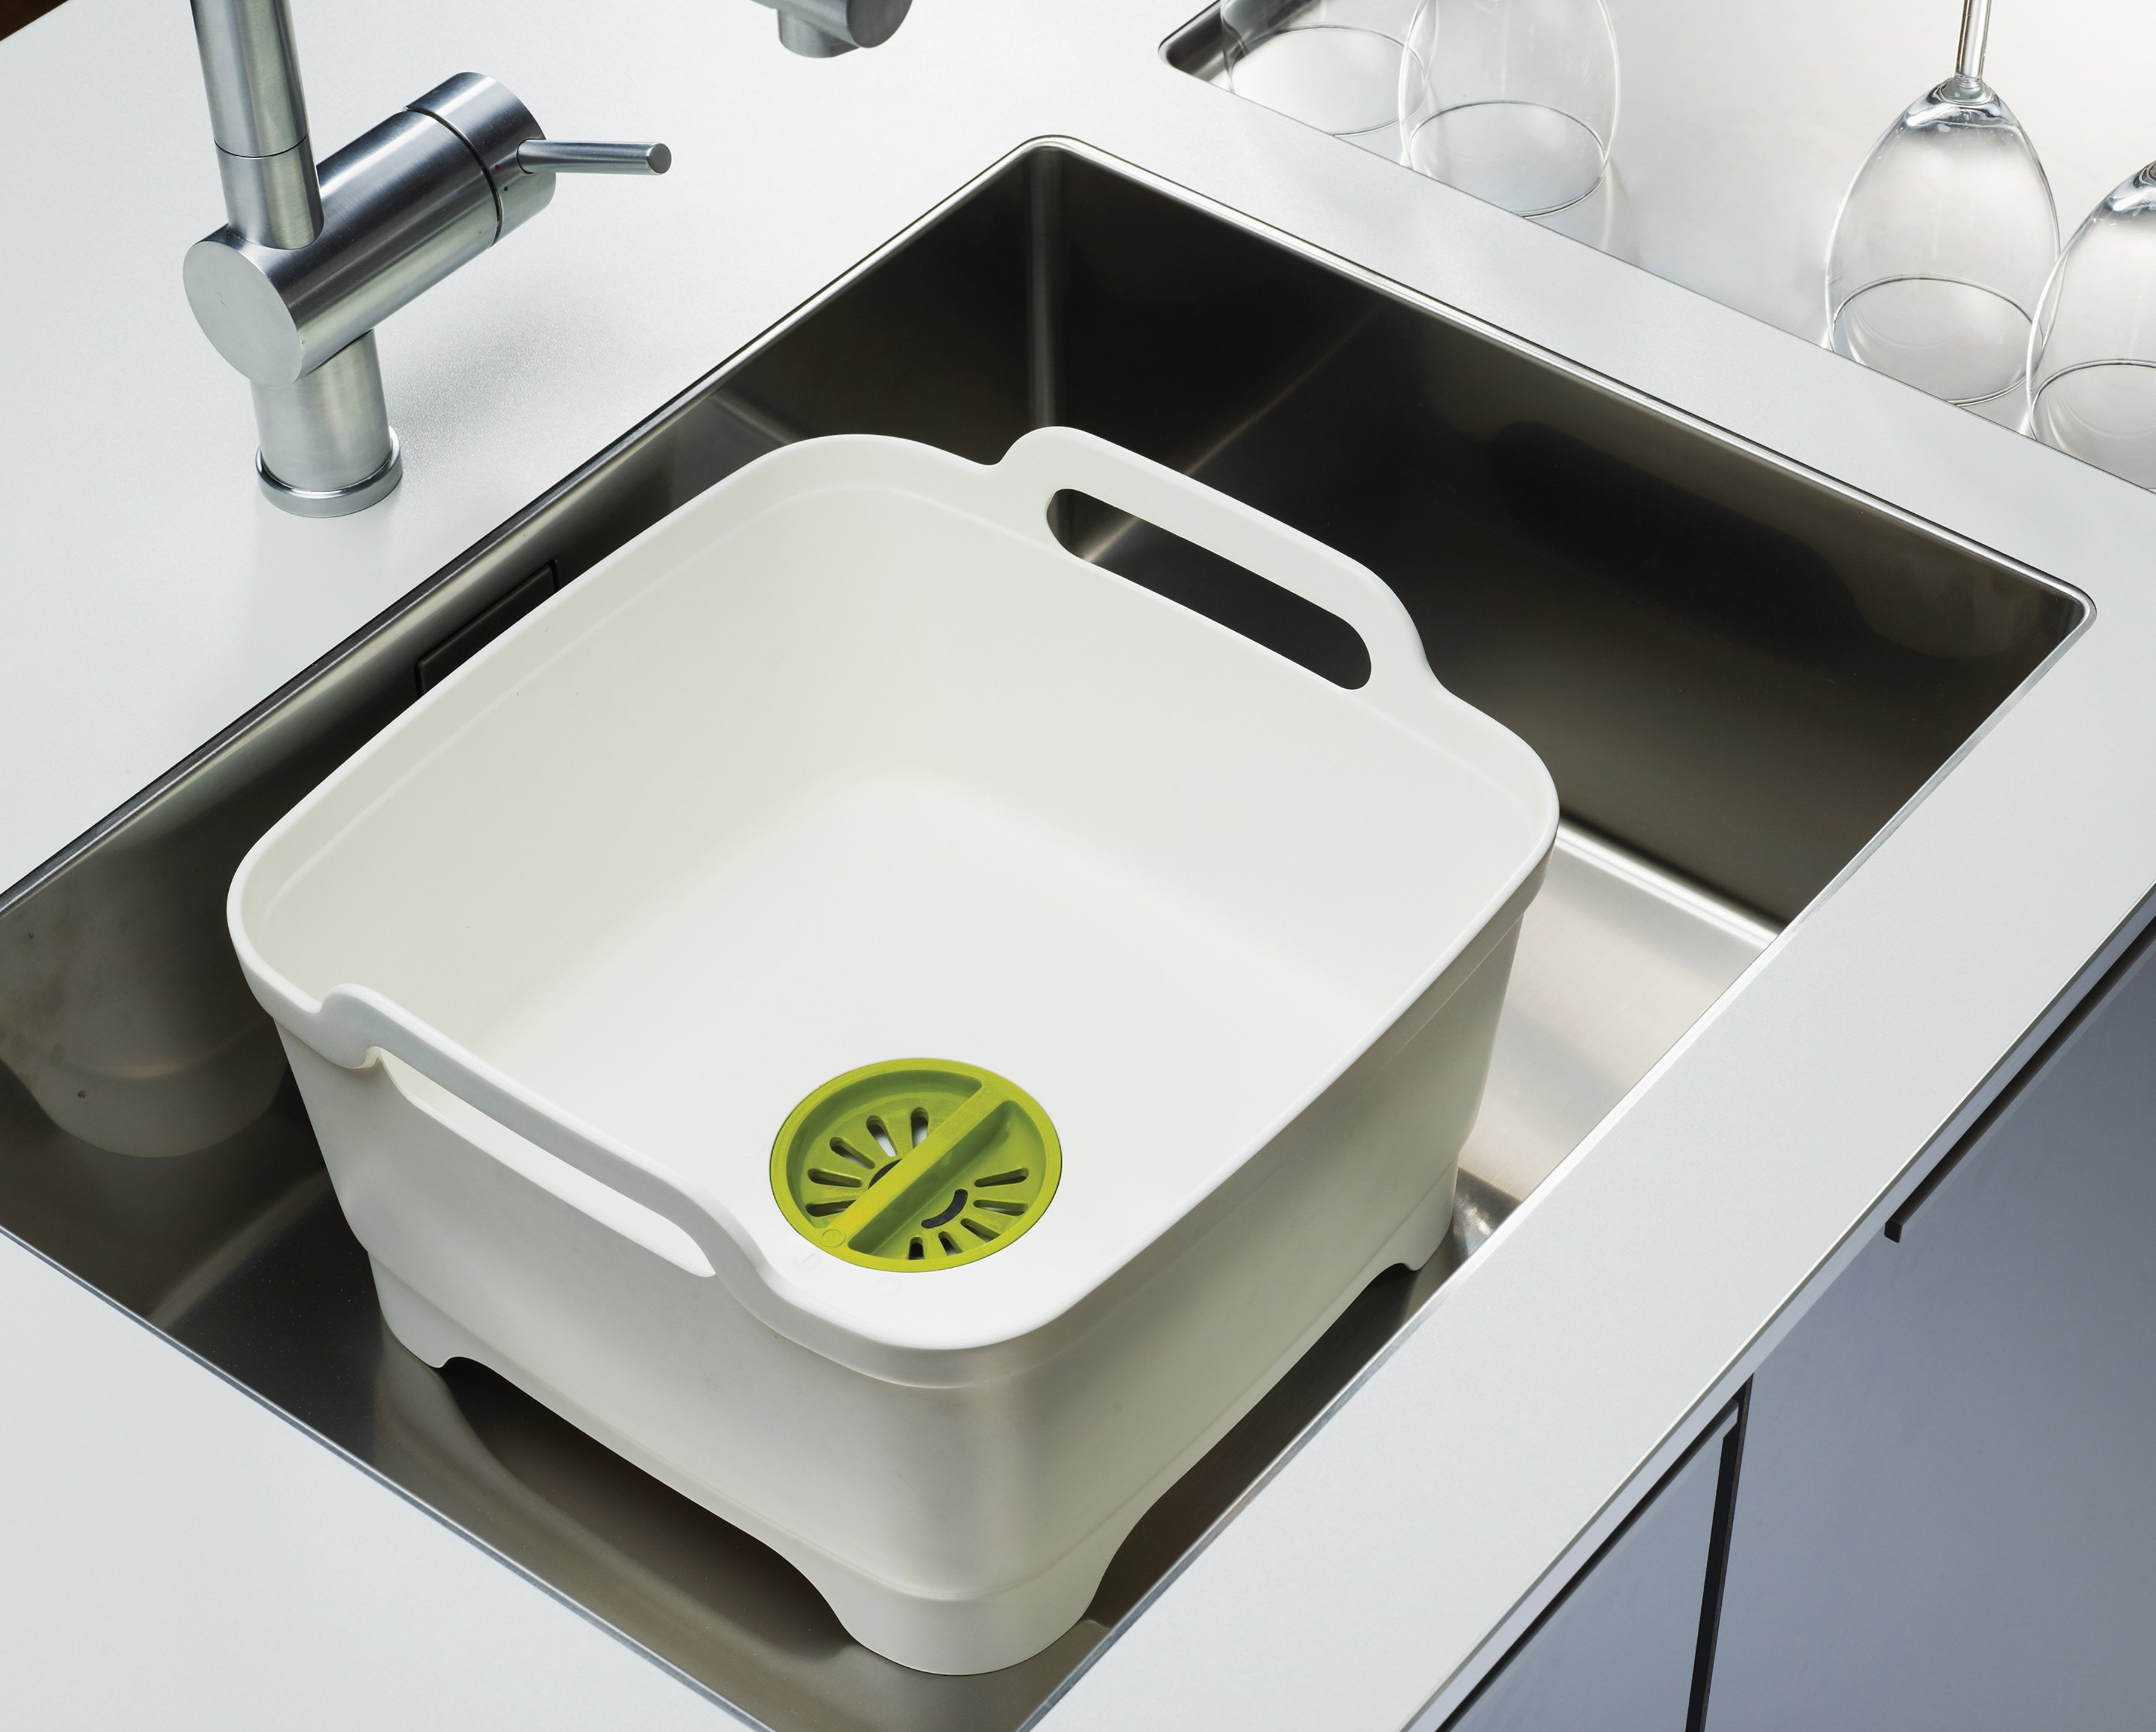 BEON.COM.AU  This smart washing up bowl comes with its own strainer plug, meaning you won’t have to lift to drain and can stop food blockages in your kitchen sink.  Removable plug feature allows you to drain or strain water, eliminating the need to lift or empty a heavy bowl Straining plug catches large food... Joseph Joseph at BEON.COM.AU